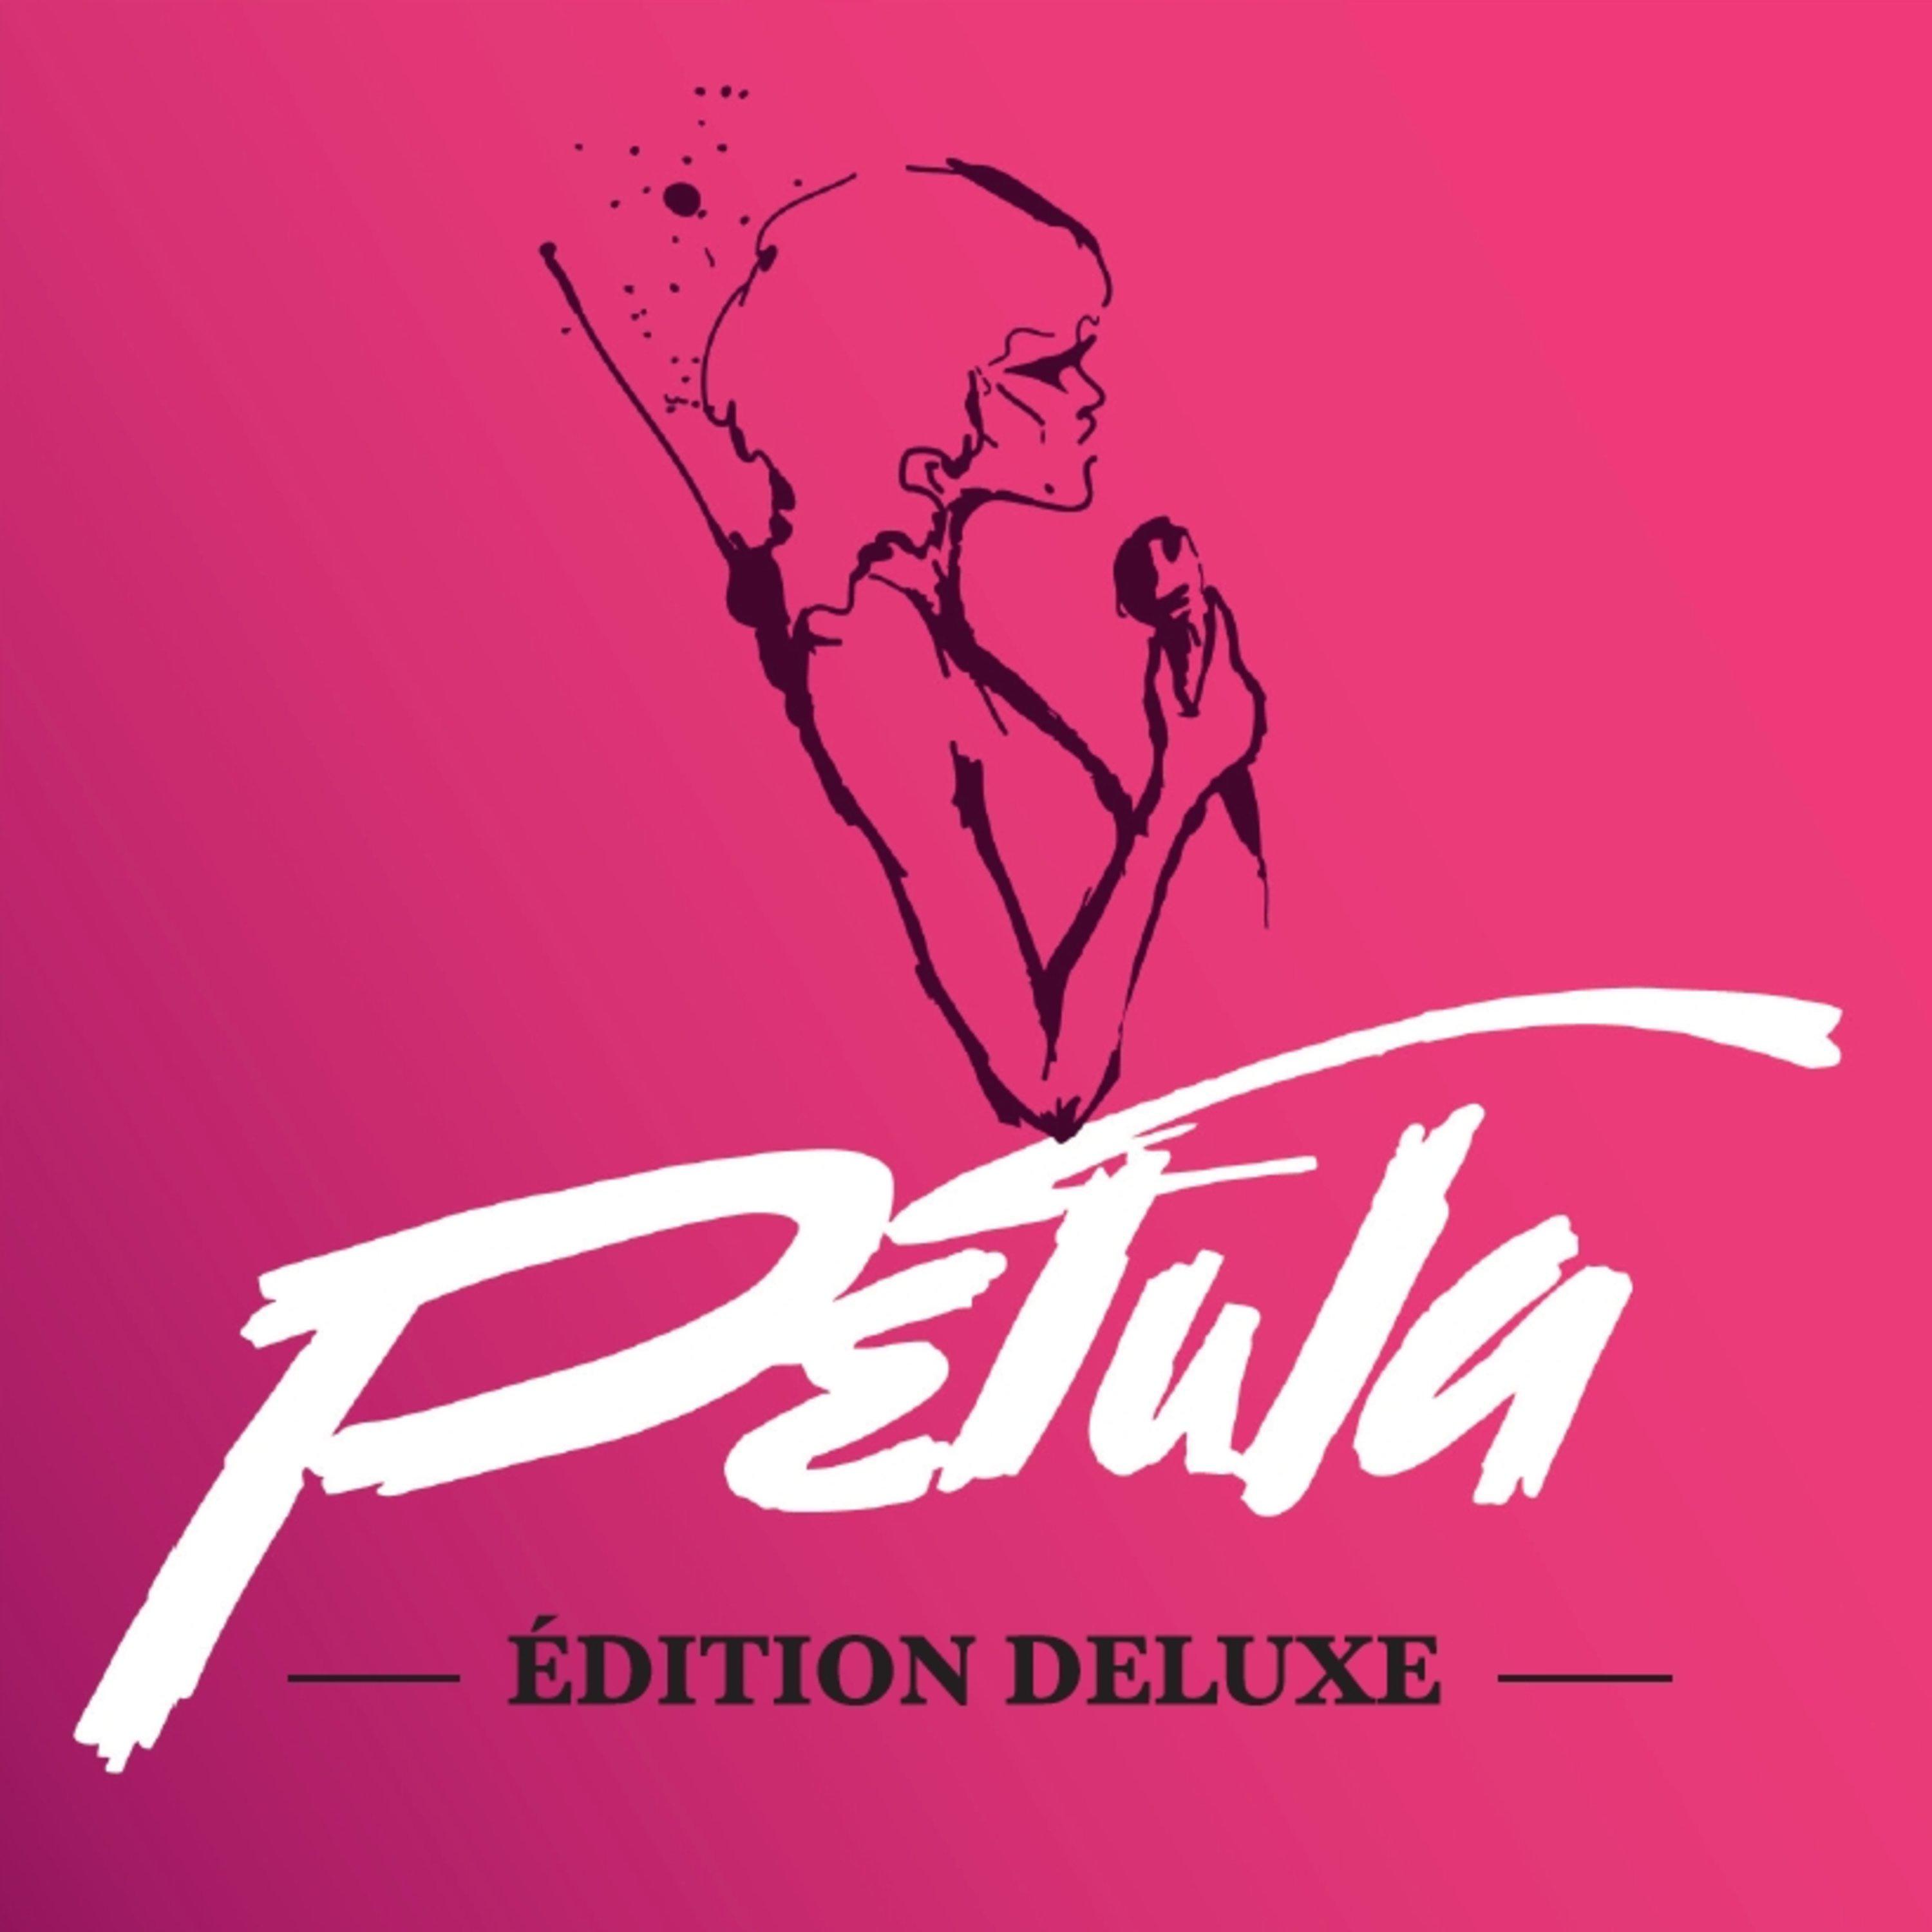 Petula (Édition deluxe)